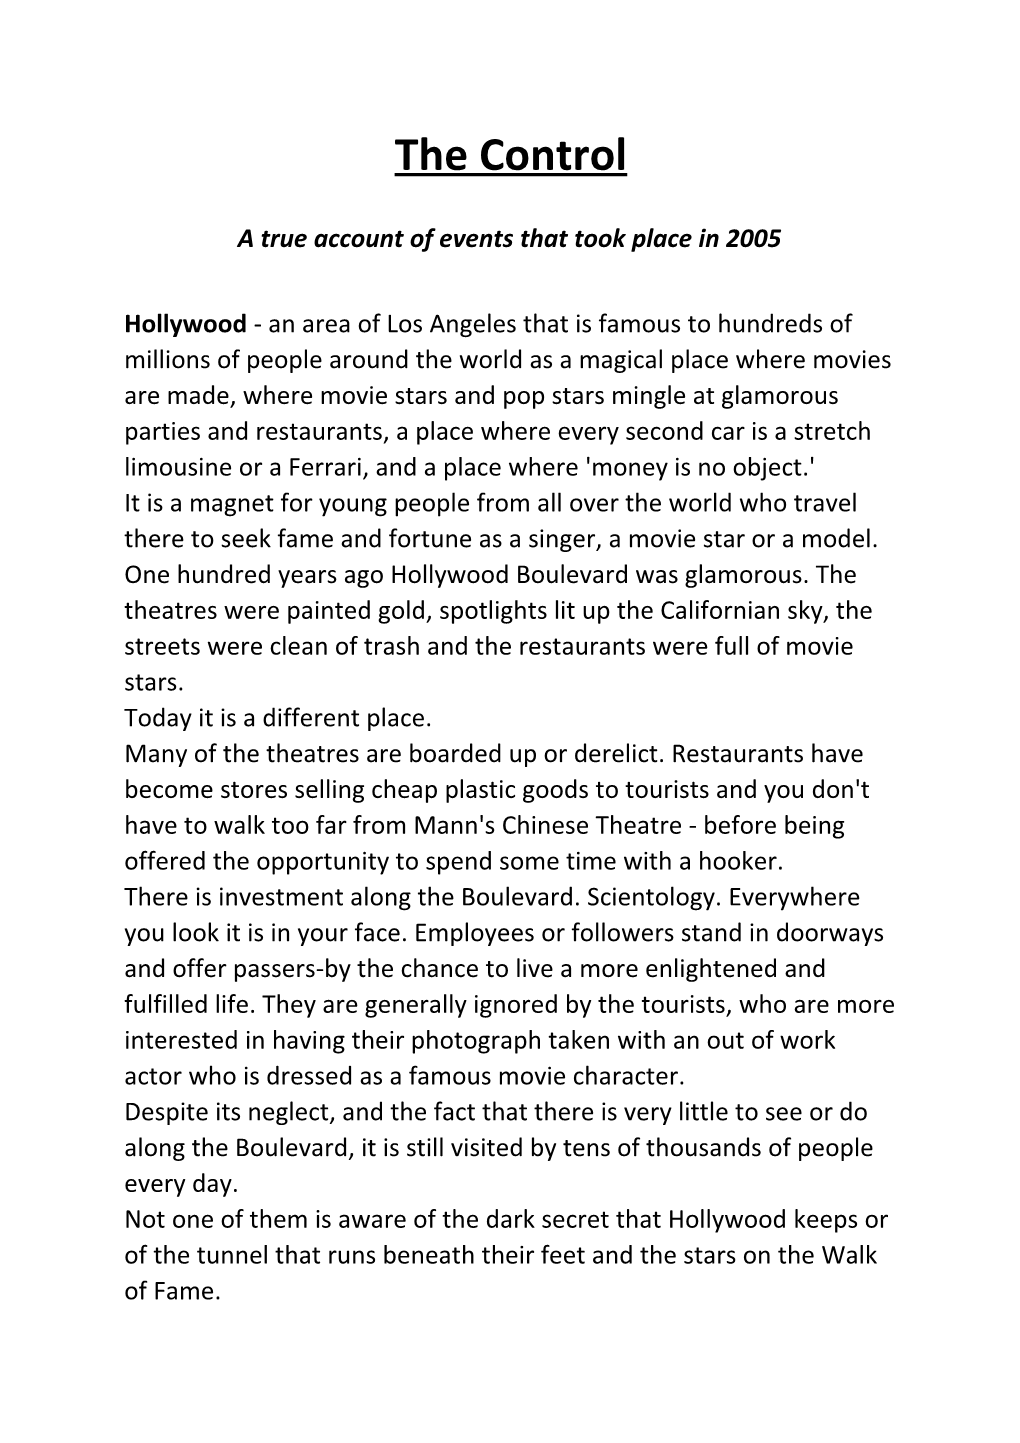 The Control a True Account of Events That Took Place in 2005